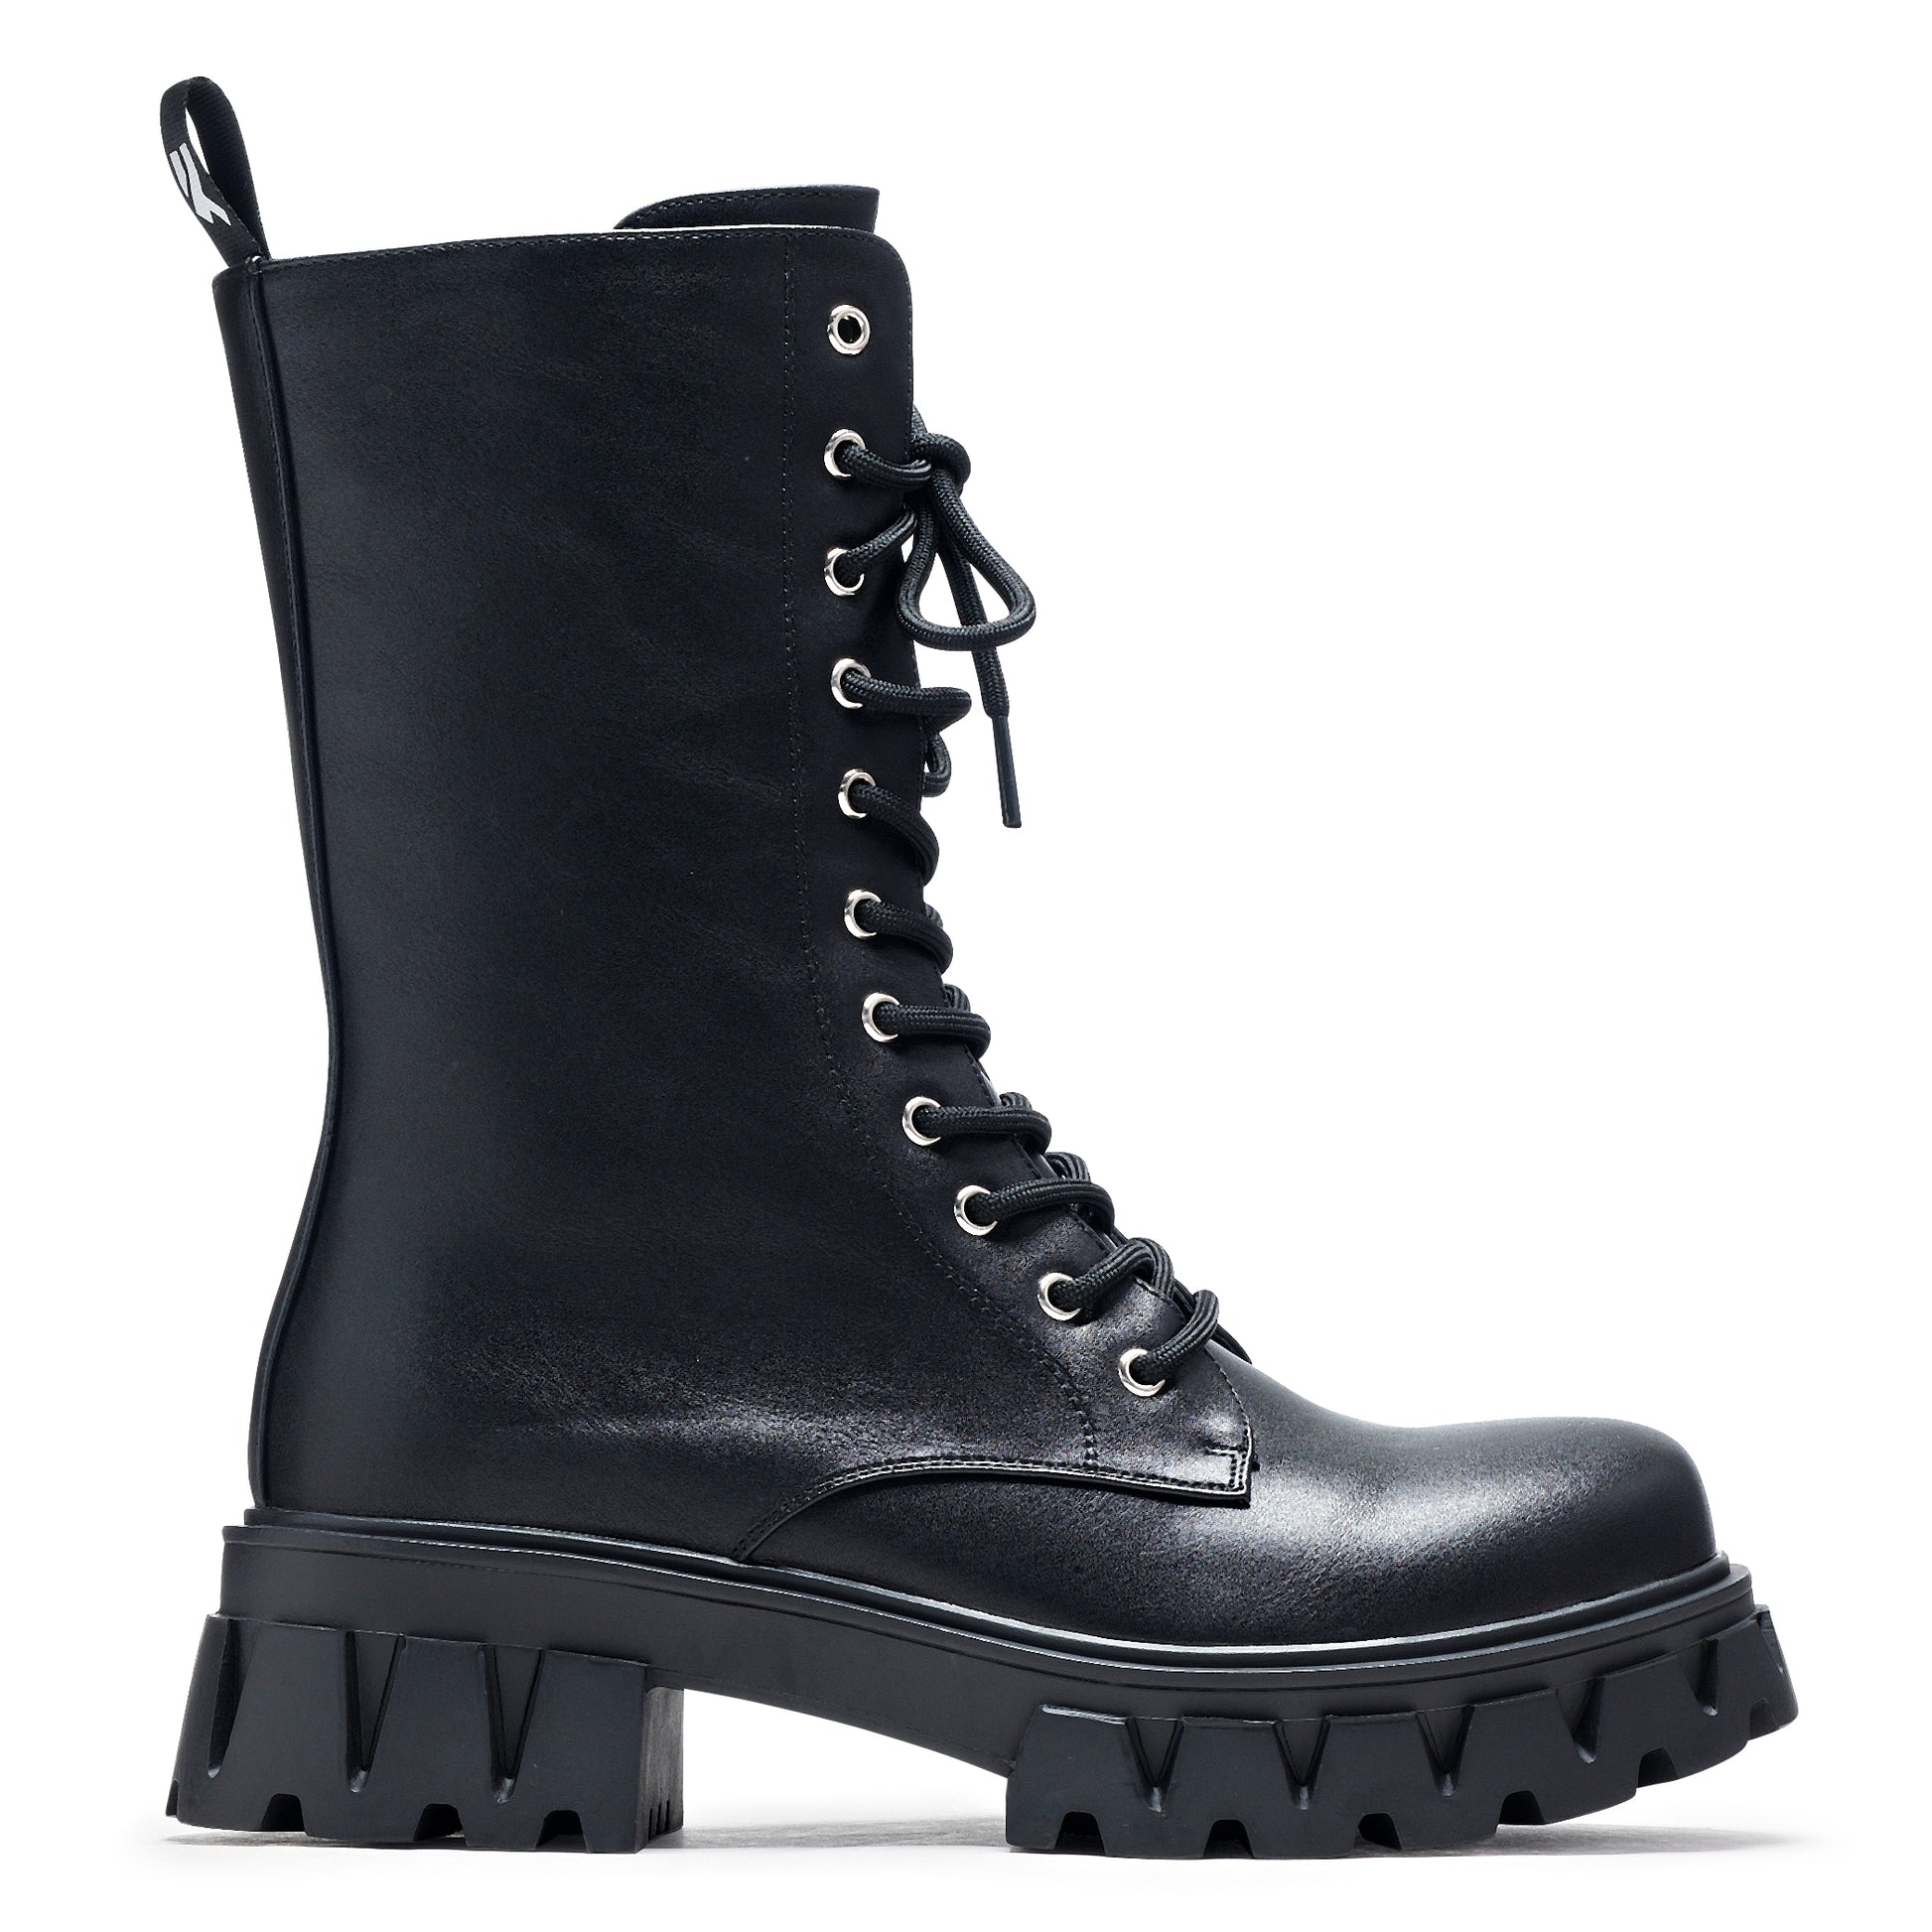 Siren Tall Lace Up Boots - Black - Ankle Boots - KOI Footwear - Black - Side View